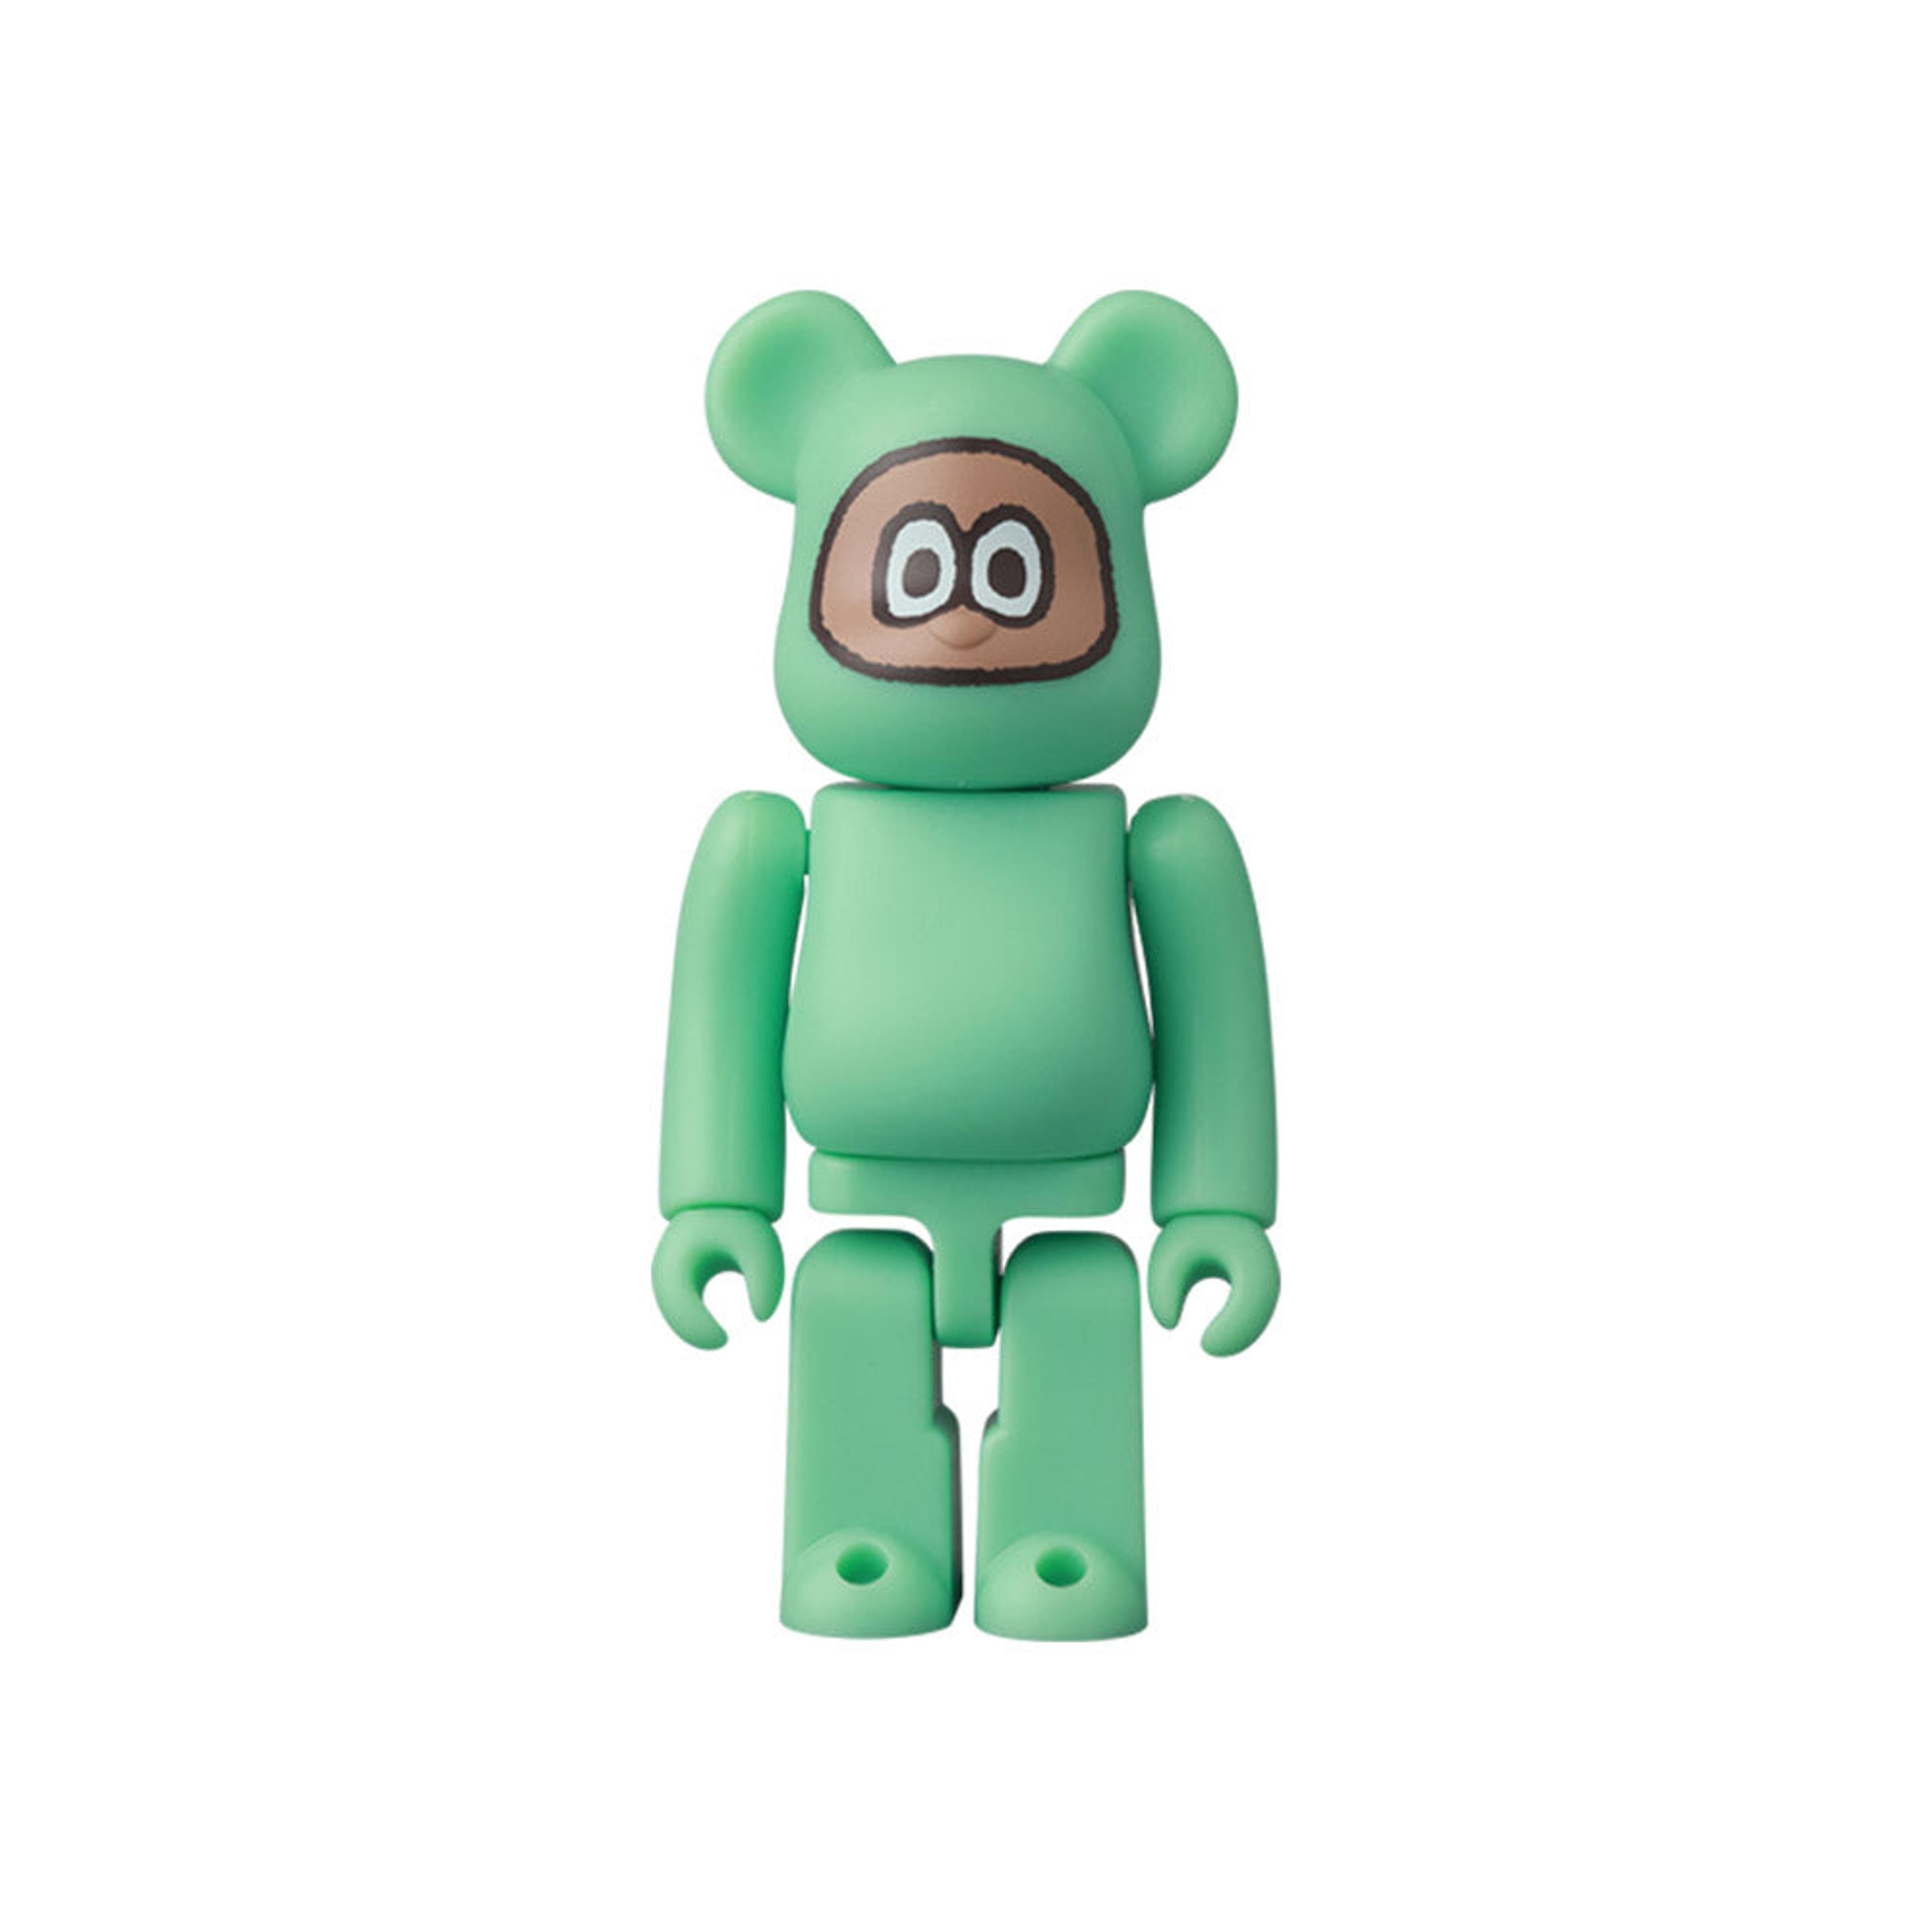 Alternate View 11 of Bearbrick Series 44 Display Case (24 Blind Boxes) by Medicom Toy